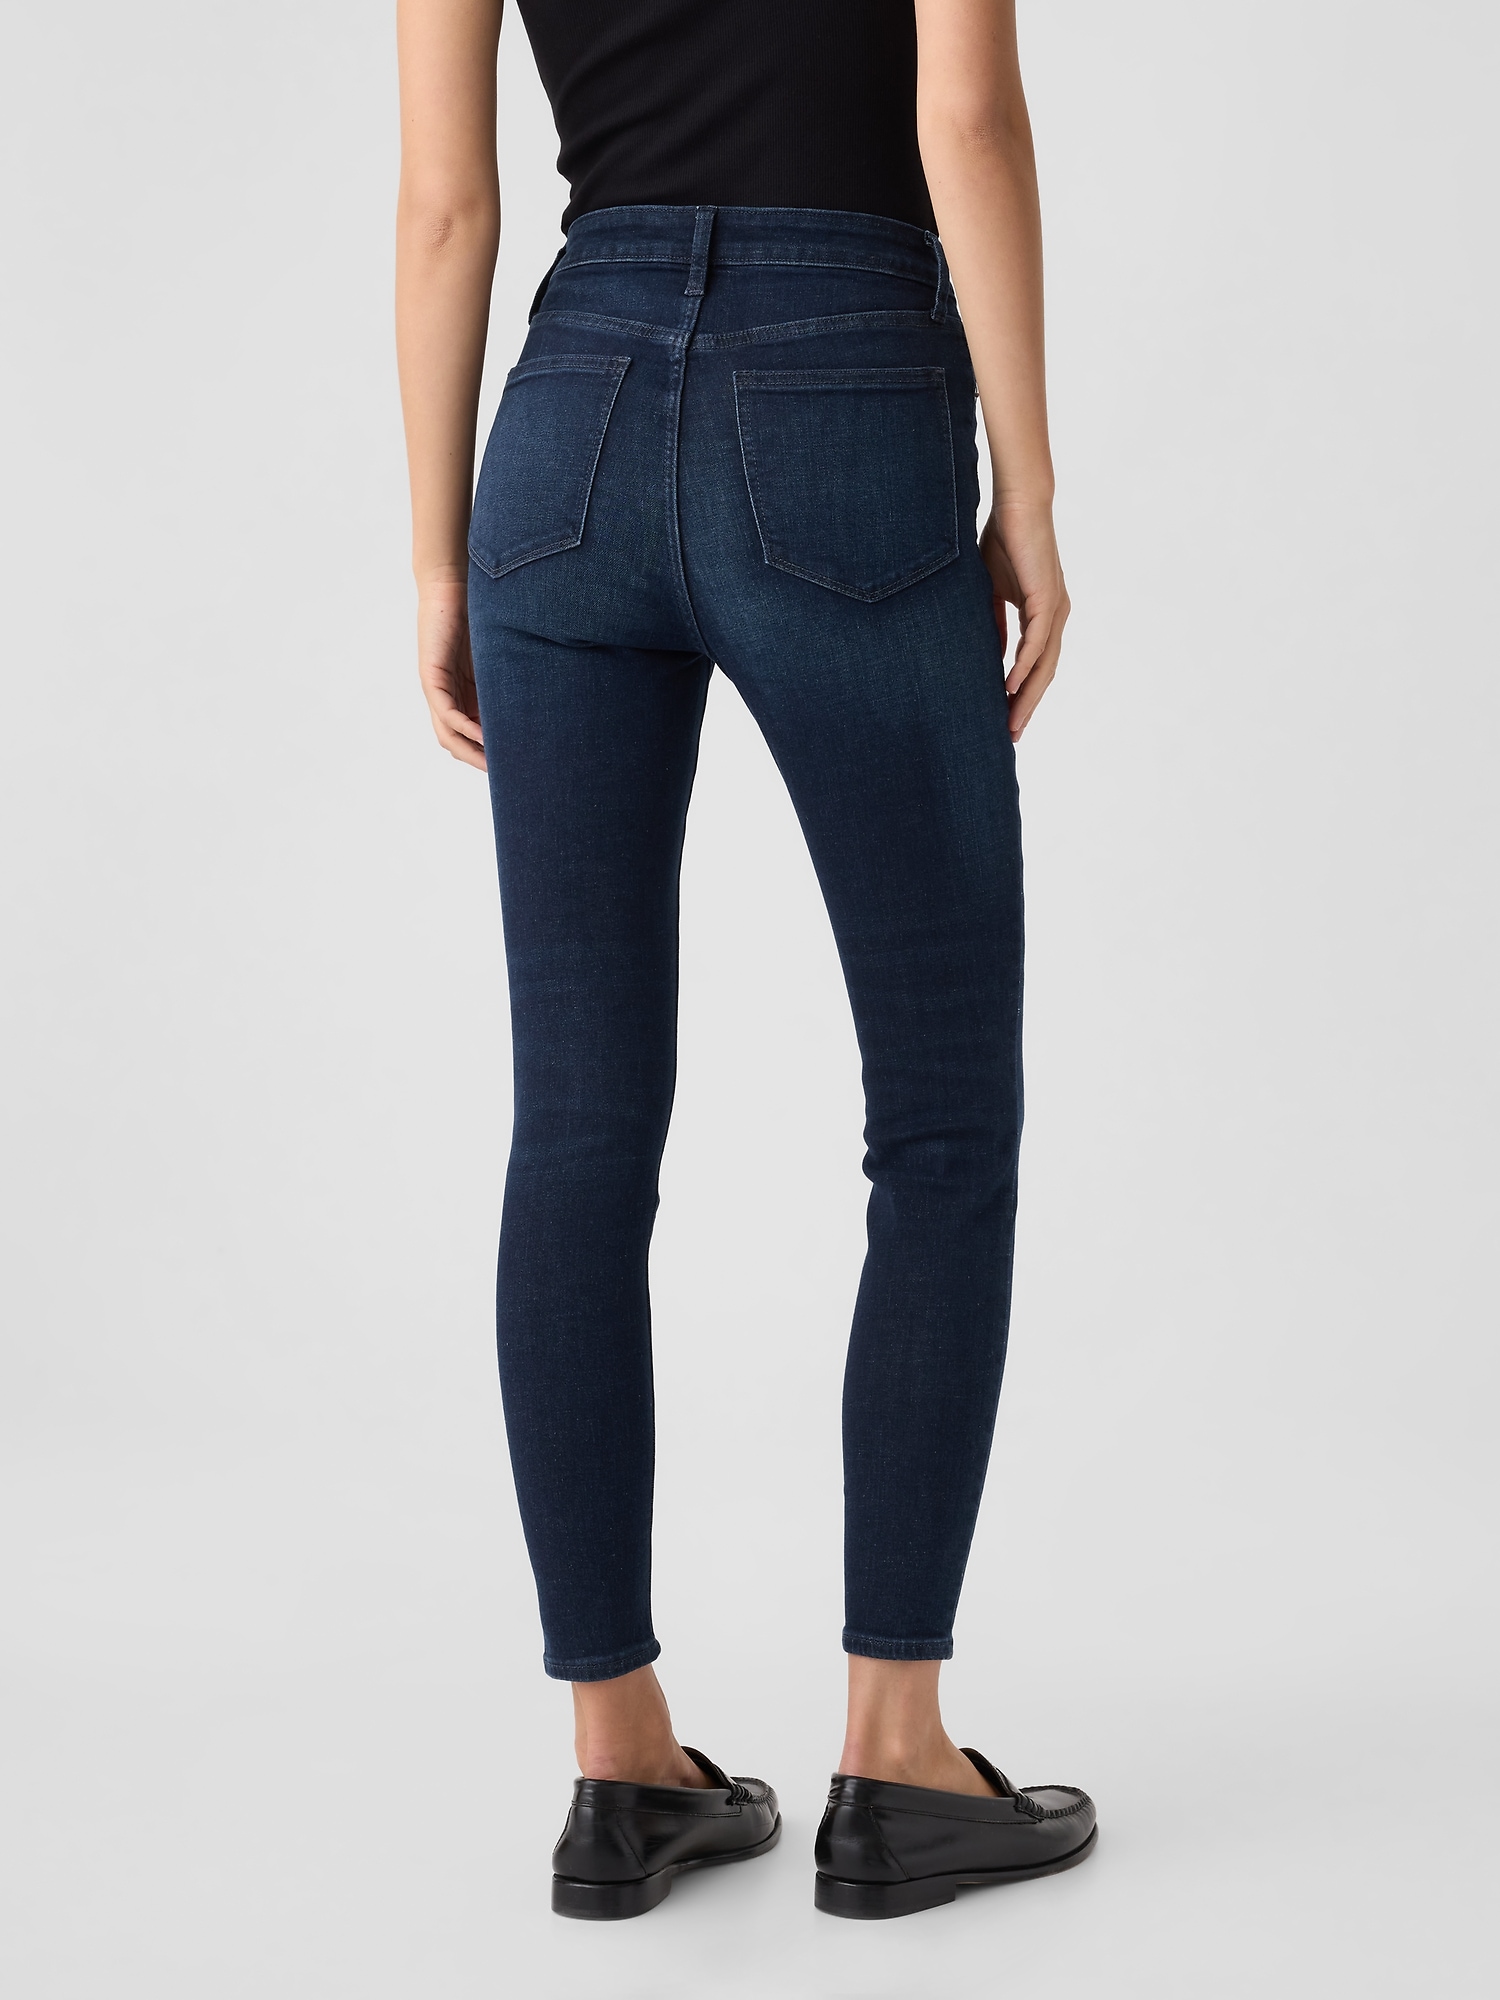 Jeans Mujer - High Rise Universal Legging Jeans with Washwel